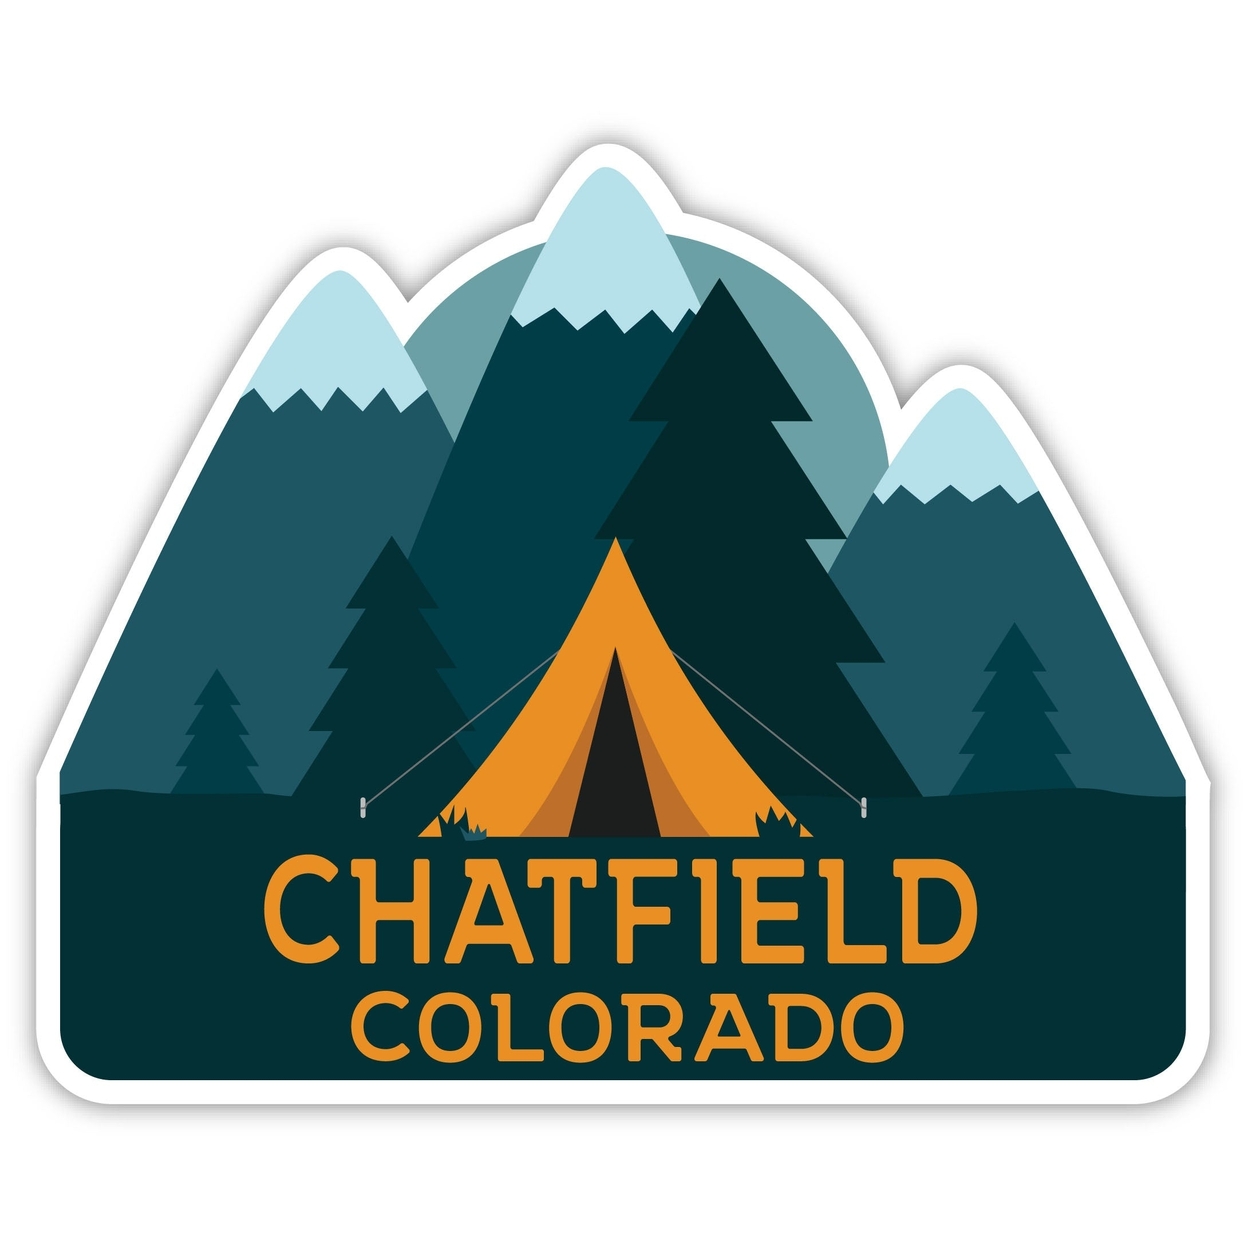 Chatfield Colorado Souvenir Decorative Stickers (Choose Theme And Size) - 4-Pack, 12-Inch, Tent